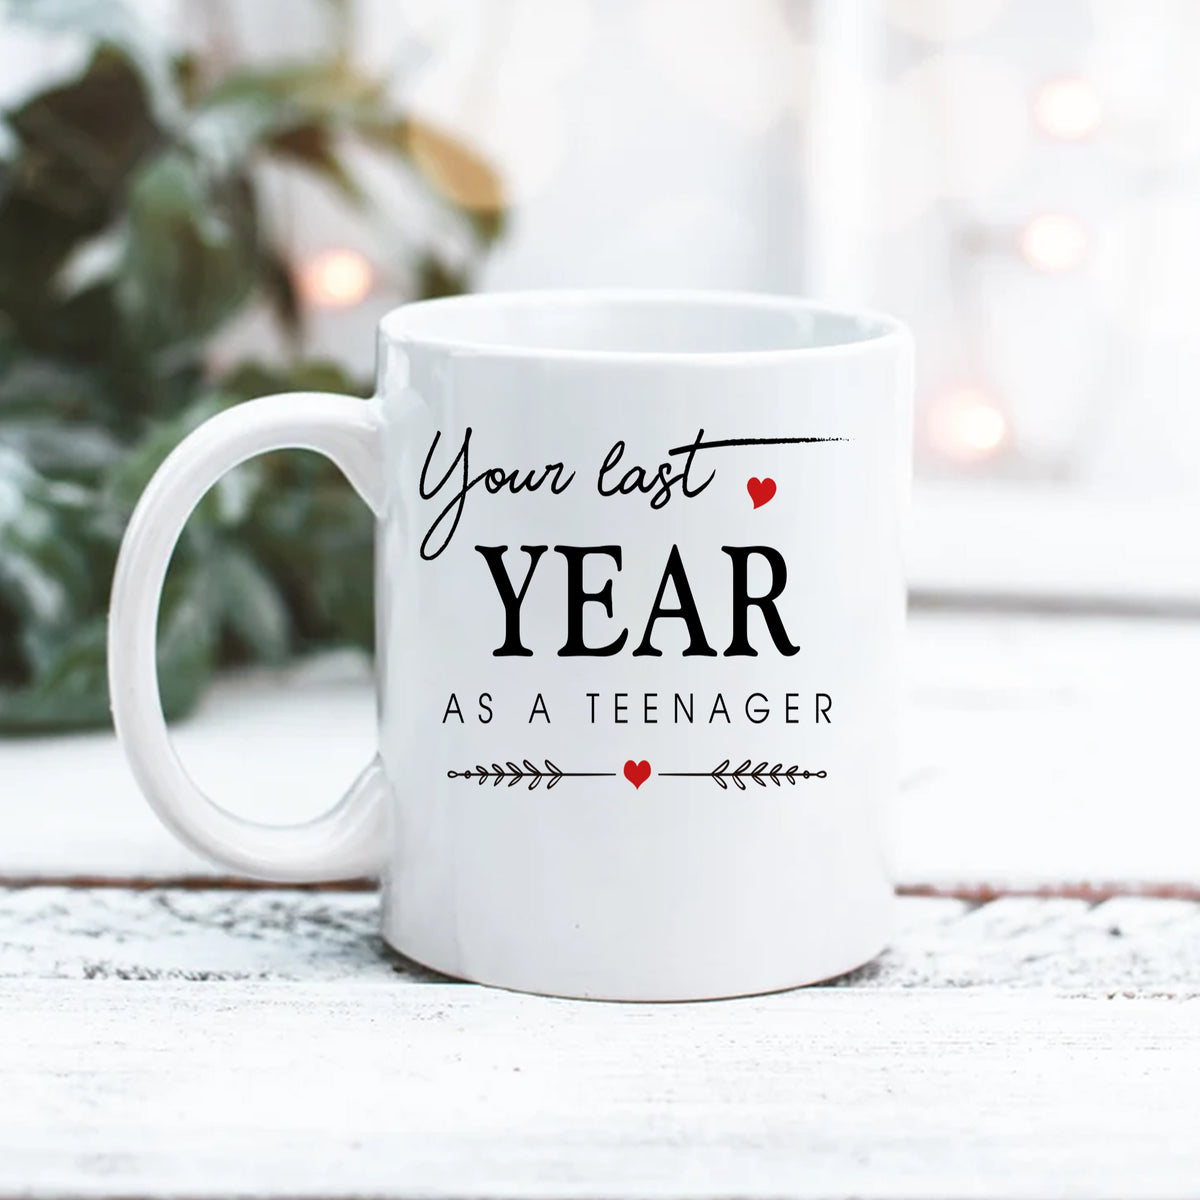 Your Last Year As A Teenager - White Mug - Birthday Gift For 19 Year Old